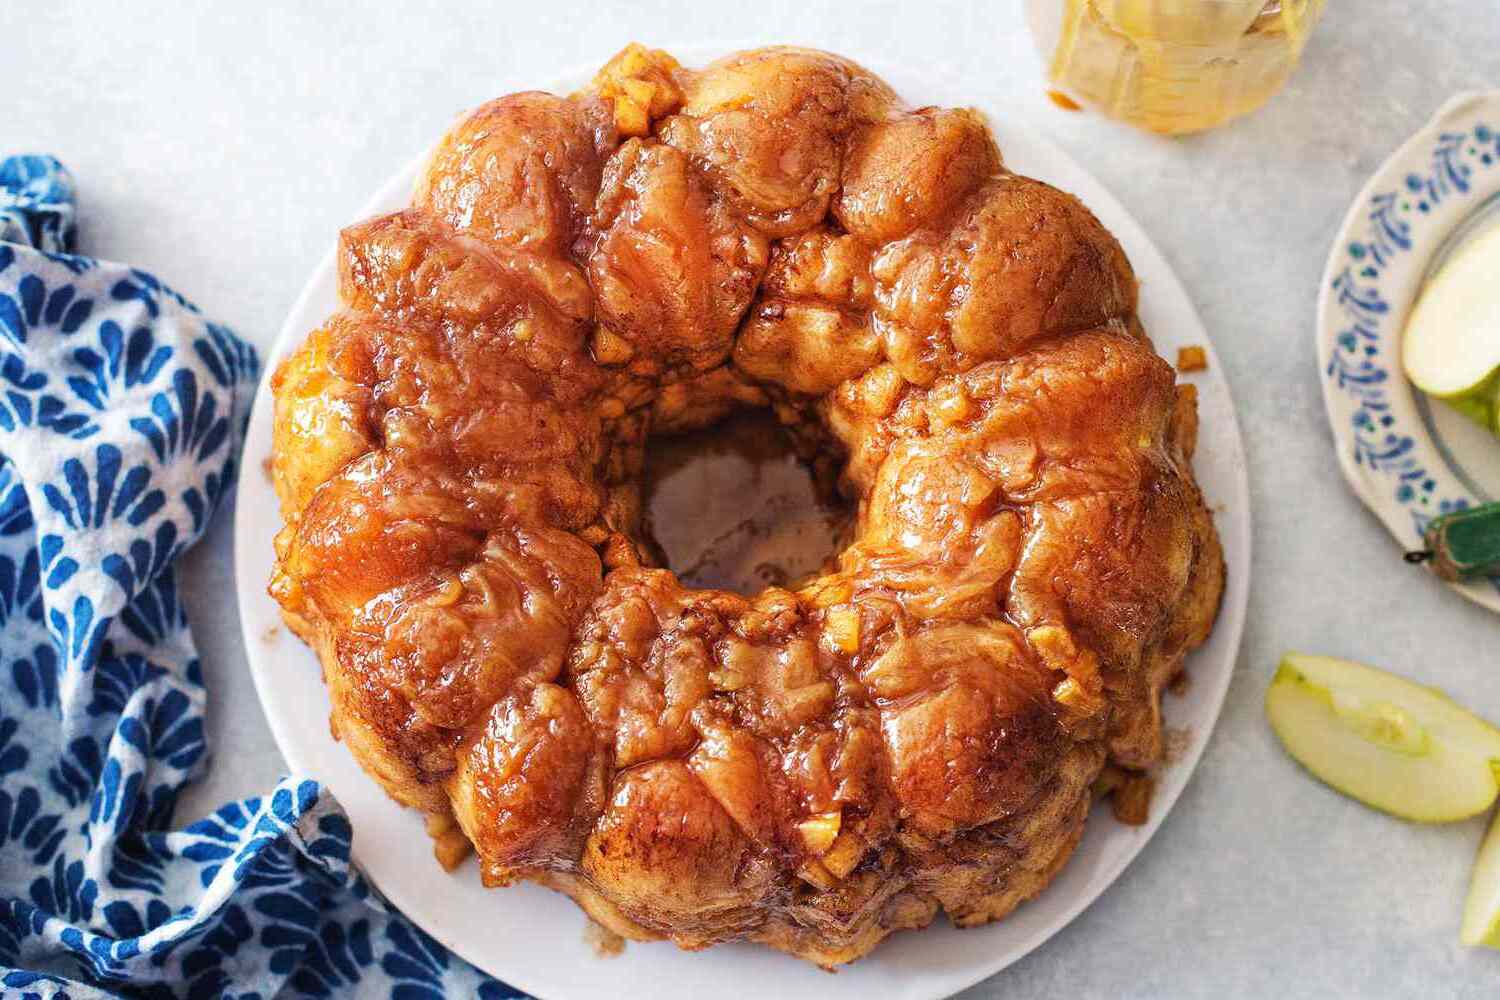 How to Make a Cinnamon Apple Pecan Caramel Monkey Bread in the Instant Pot